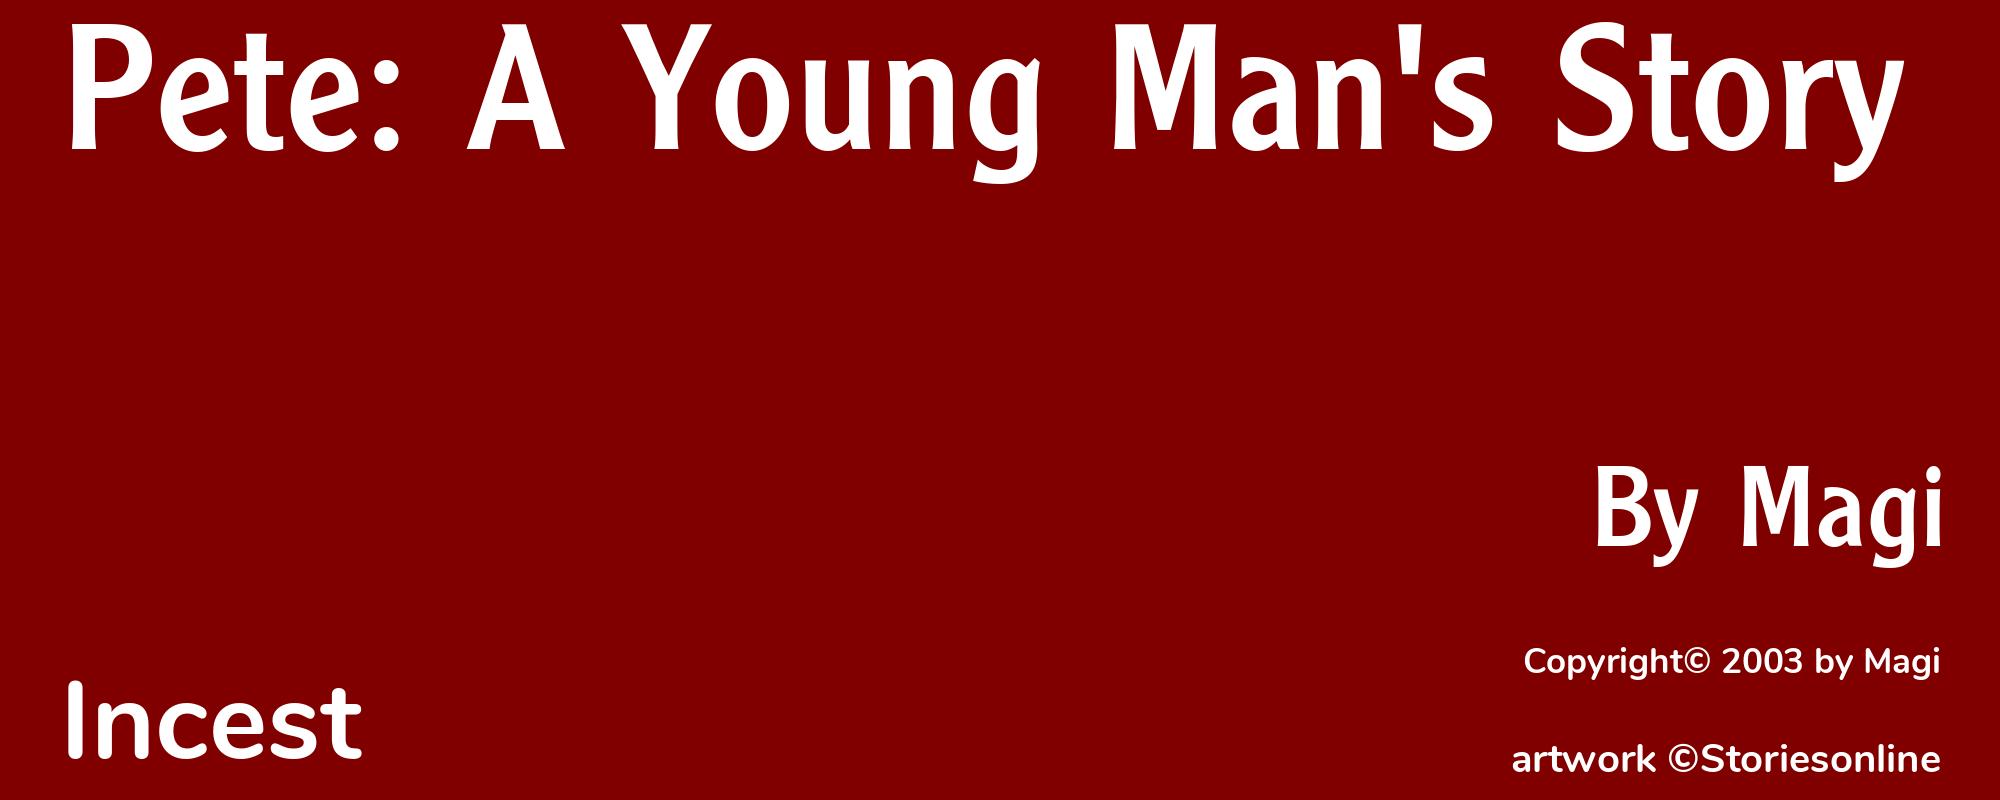 Pete: A Young Man's Story - Cover